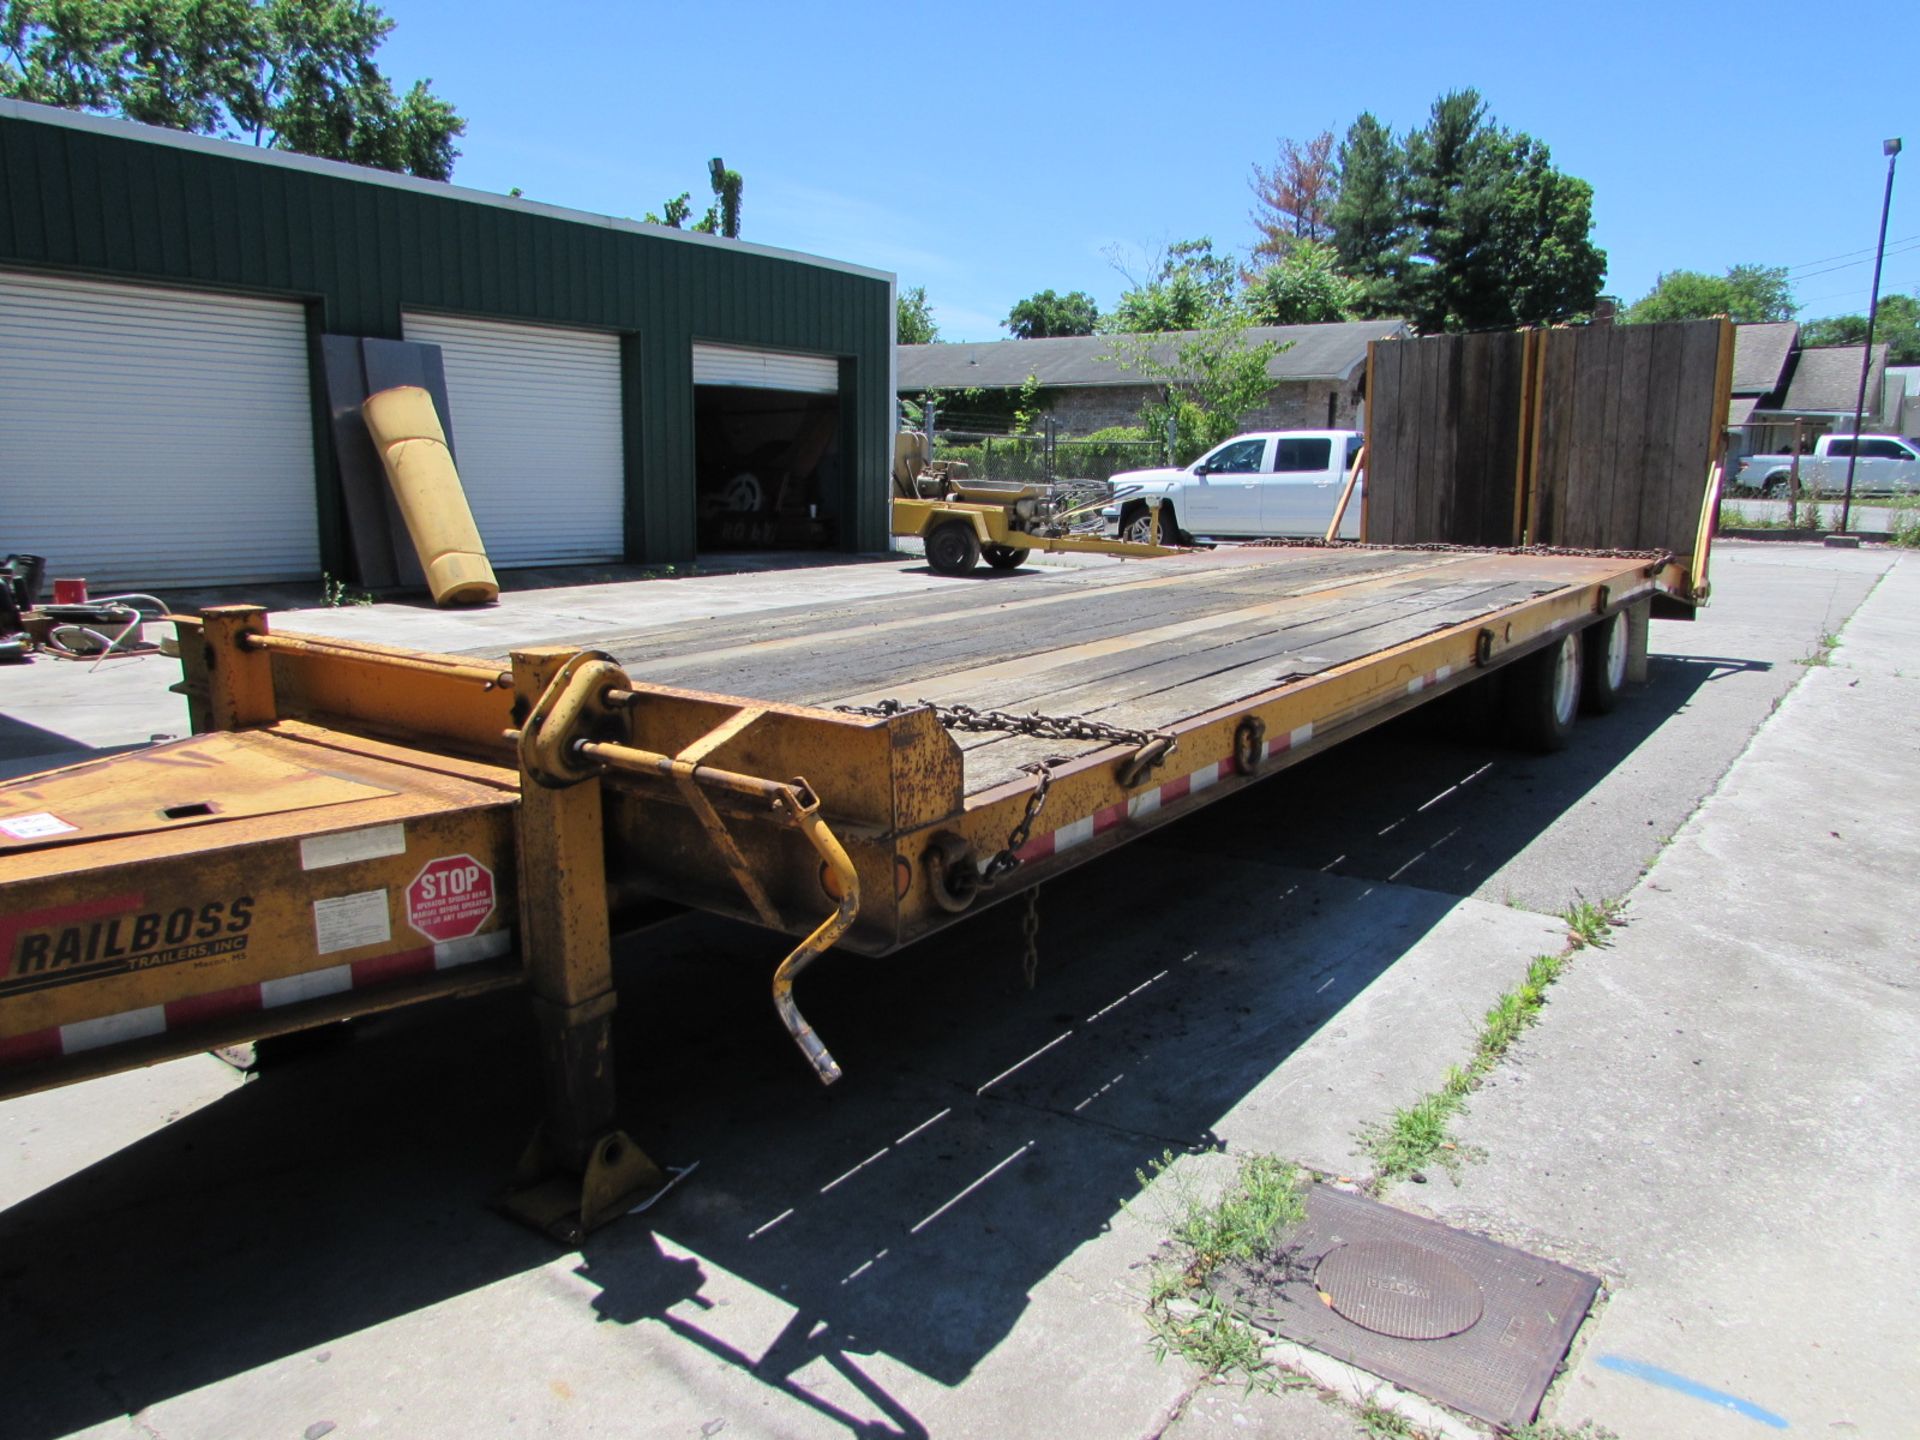 2002 Trail Boss 20-Ton Paver Trailer, Electric Brakes, Hydraulic Ramps, S/N 4S0DP302921000735 - Image 2 of 4